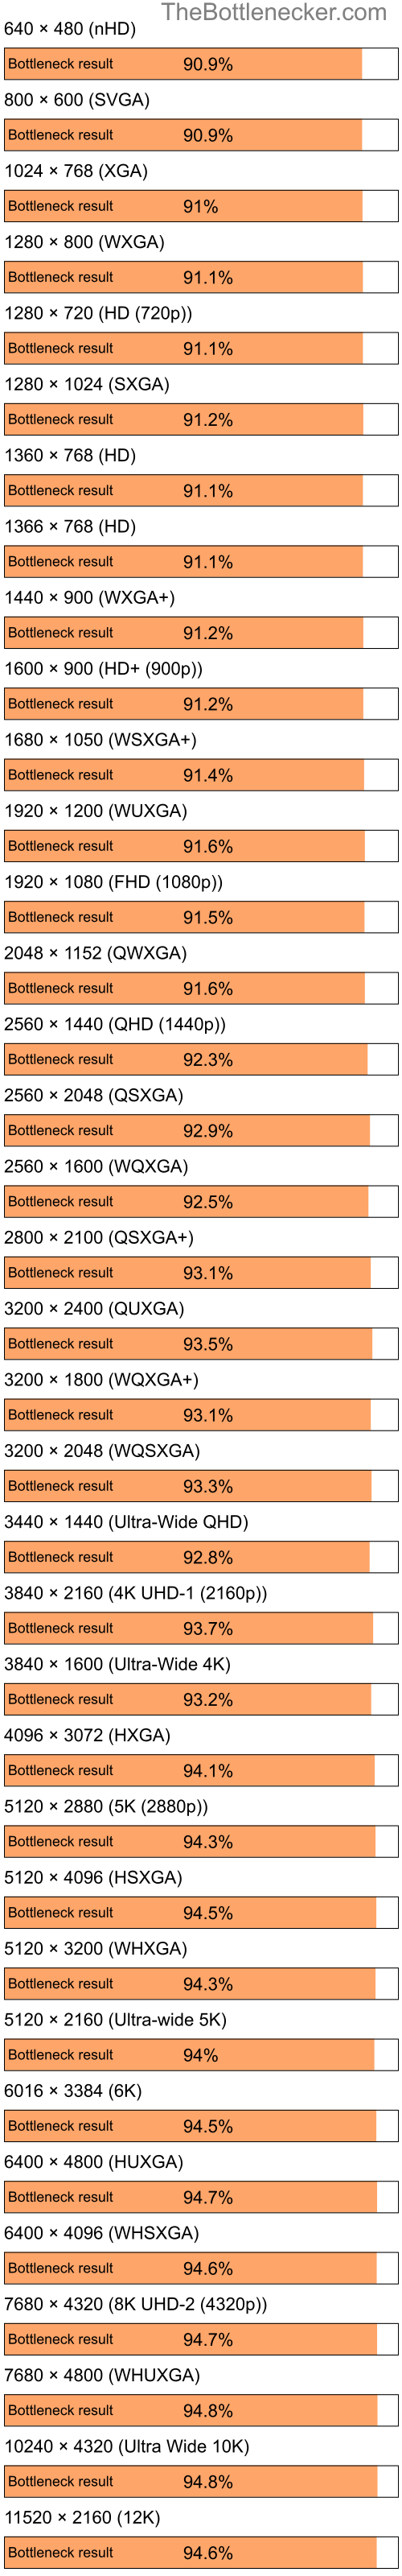 Bottleneck results by resolution for Intel Celeron M 410 and NVIDIA GeForce4 Ti 4200 in Graphic Card Intense Tasks